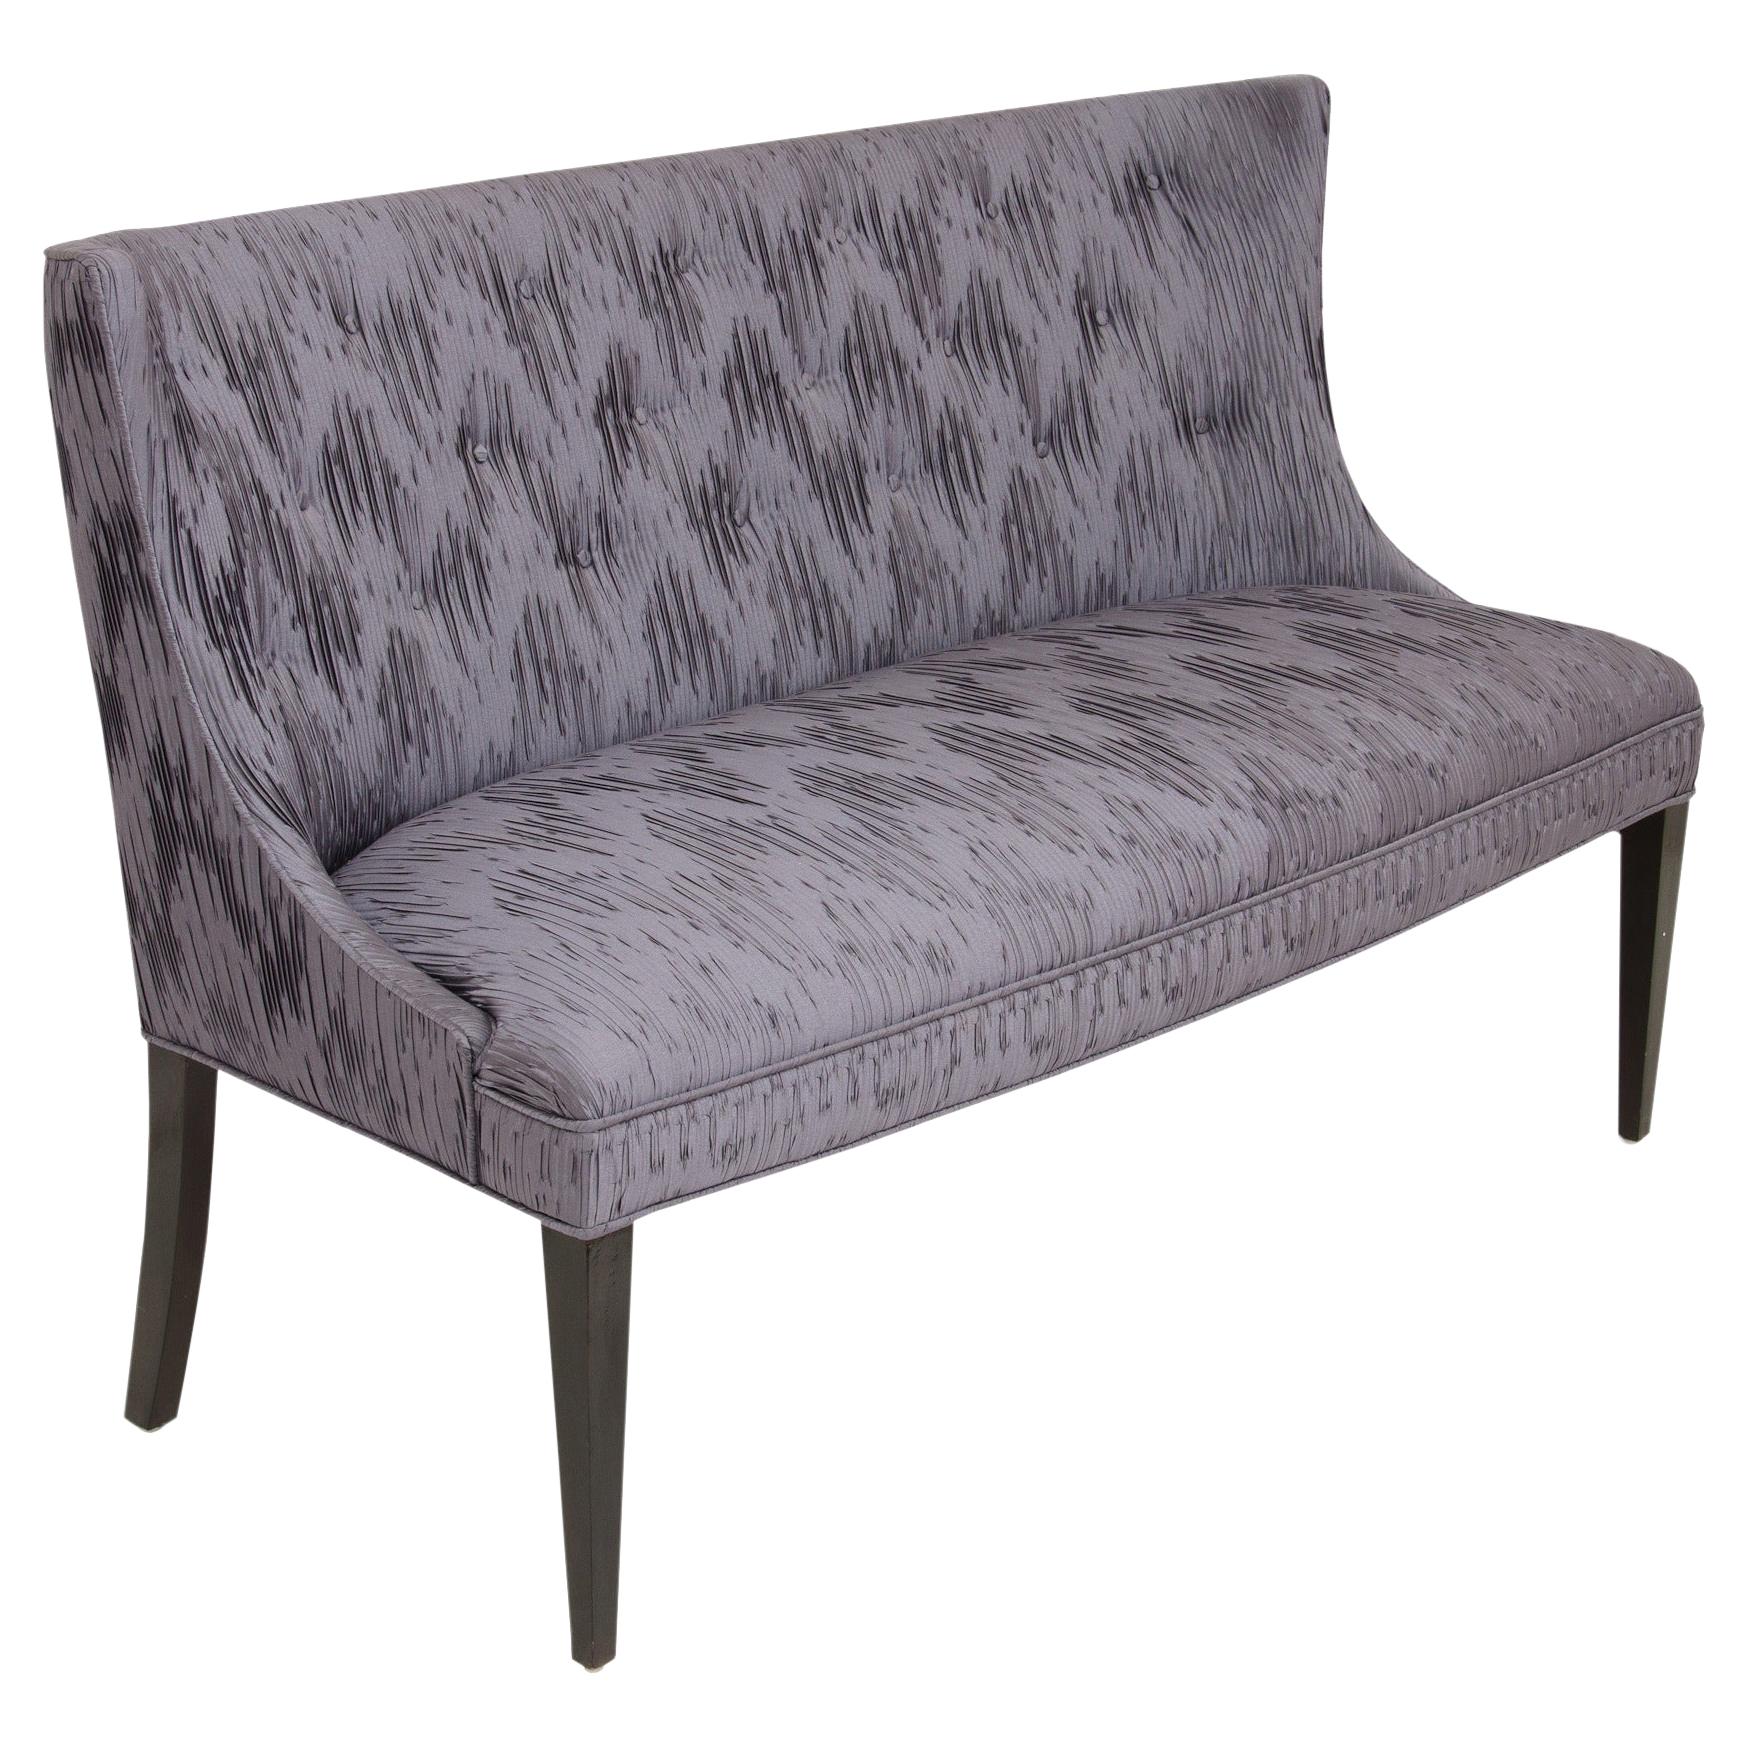 French settee 1940's style with Tufted Back and Tapered Legs For Sale